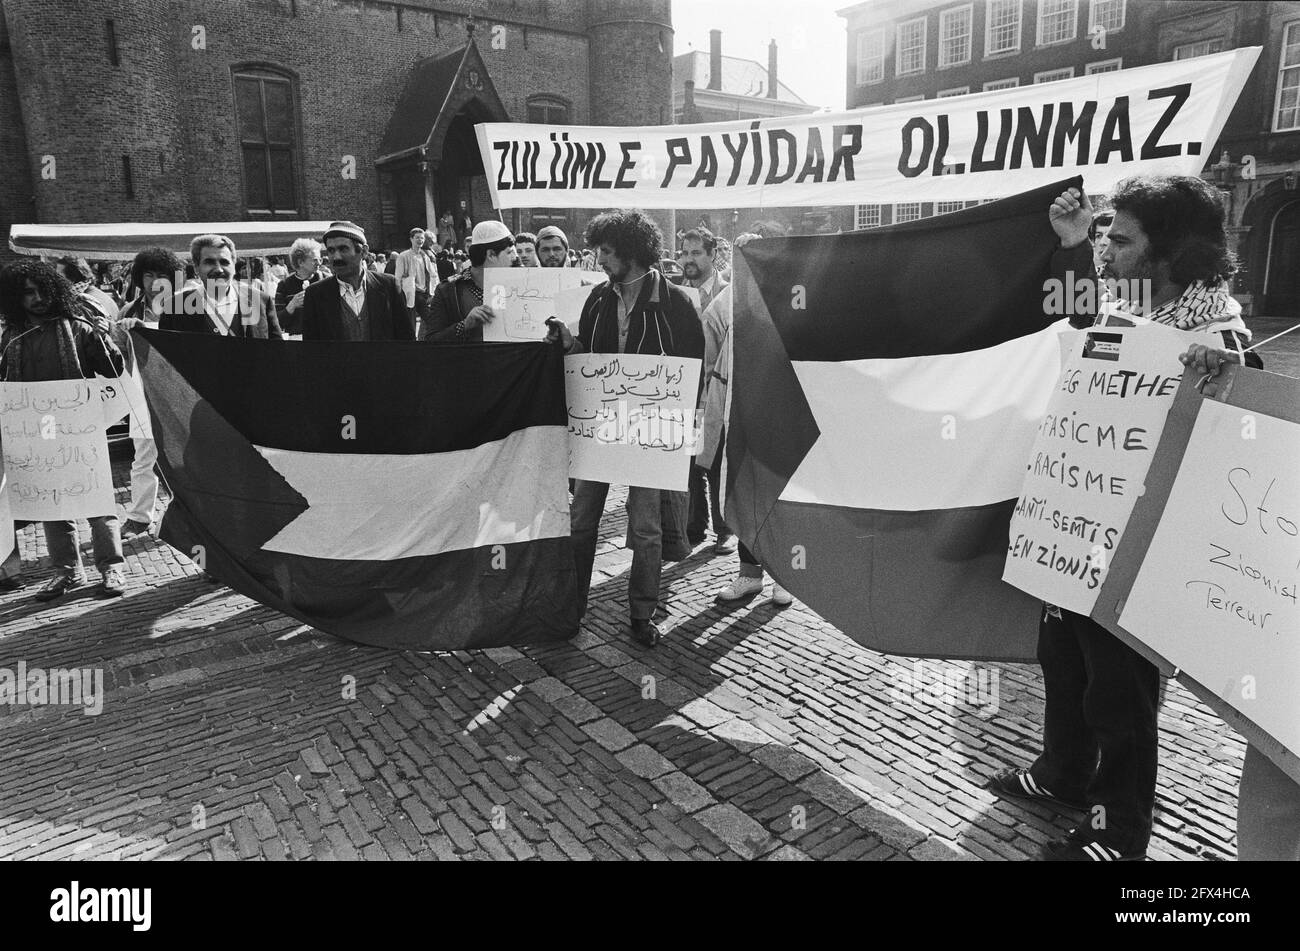 Demonstration in Binnenhof by Palestinian Society for cessation of killing Palestinian demonstrators, April 16, 1982, Demonstration, MURDER, demonstrators, The Netherlands, 20th century press agency photo, news to remember, documentary, historic photography 1945-1990, visual stories, human history of the Twentieth Century, capturing moments in time Stock Photo